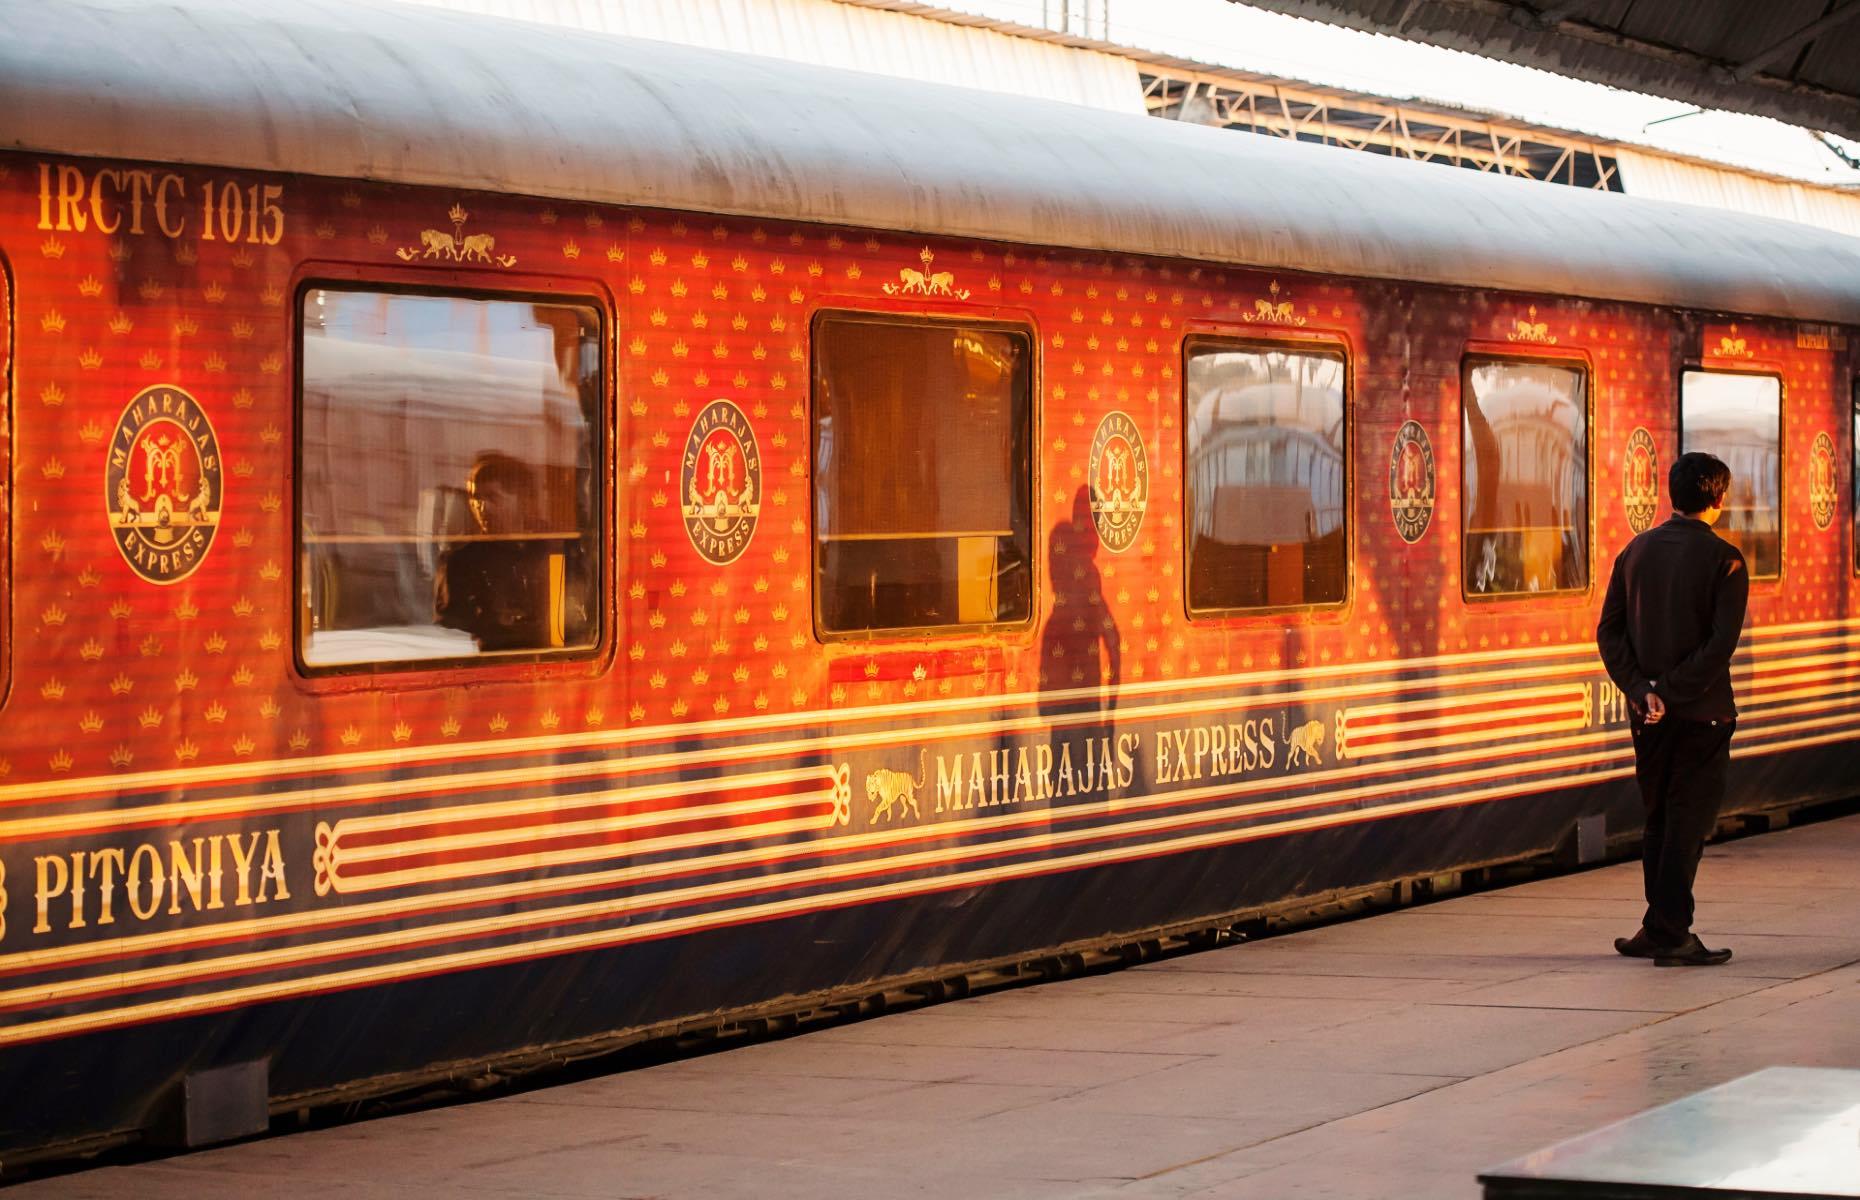 <p>Taking its moniker from the name for an Indian prince, <a href="https://www.maharajaexpress.co.uk">this five-star train</a>, which connects the metropoles of Mumbai and Delhi, is unapologetically lavish, adorned with rich tapestries, antiques and over-the-top decor inspired by Indian royalty. Trips vary in length, between three and six nights, but the popular six-day ‘Heritage of India’ tour stretches between some of the country’s most iconic, and interesting, cities including Udaipur, Jodhpur, Bikaner, Jaipur and Agra, with highlights such as a Champagne breakfast beside the iconic Taj Mahal.</p>